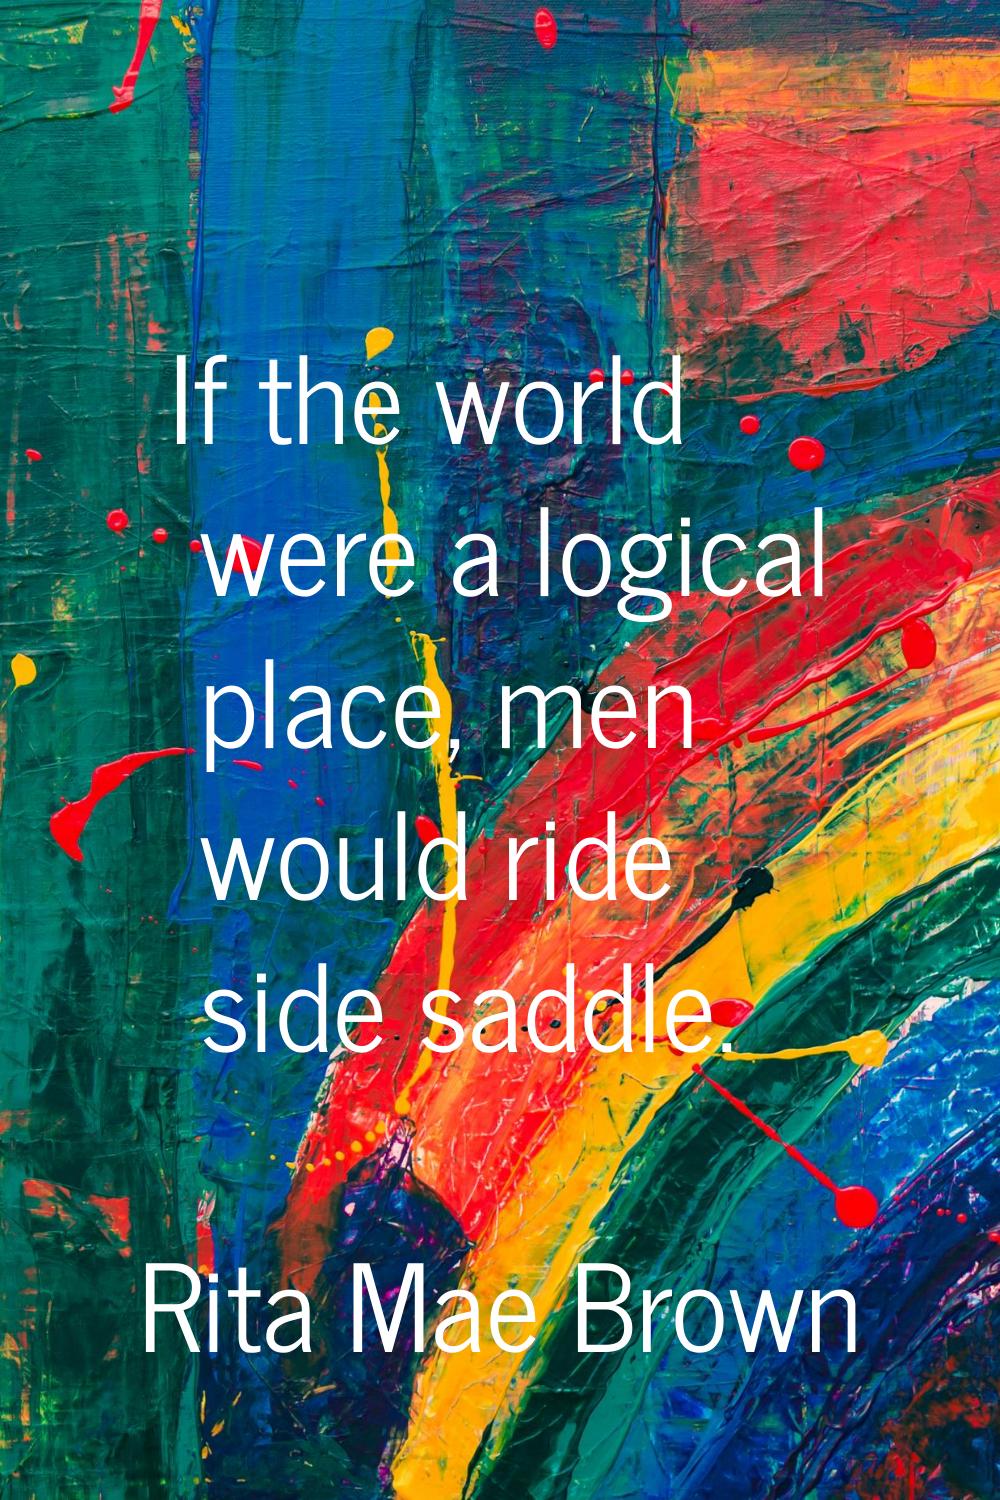 If the world were a logical place, men would ride side saddle.